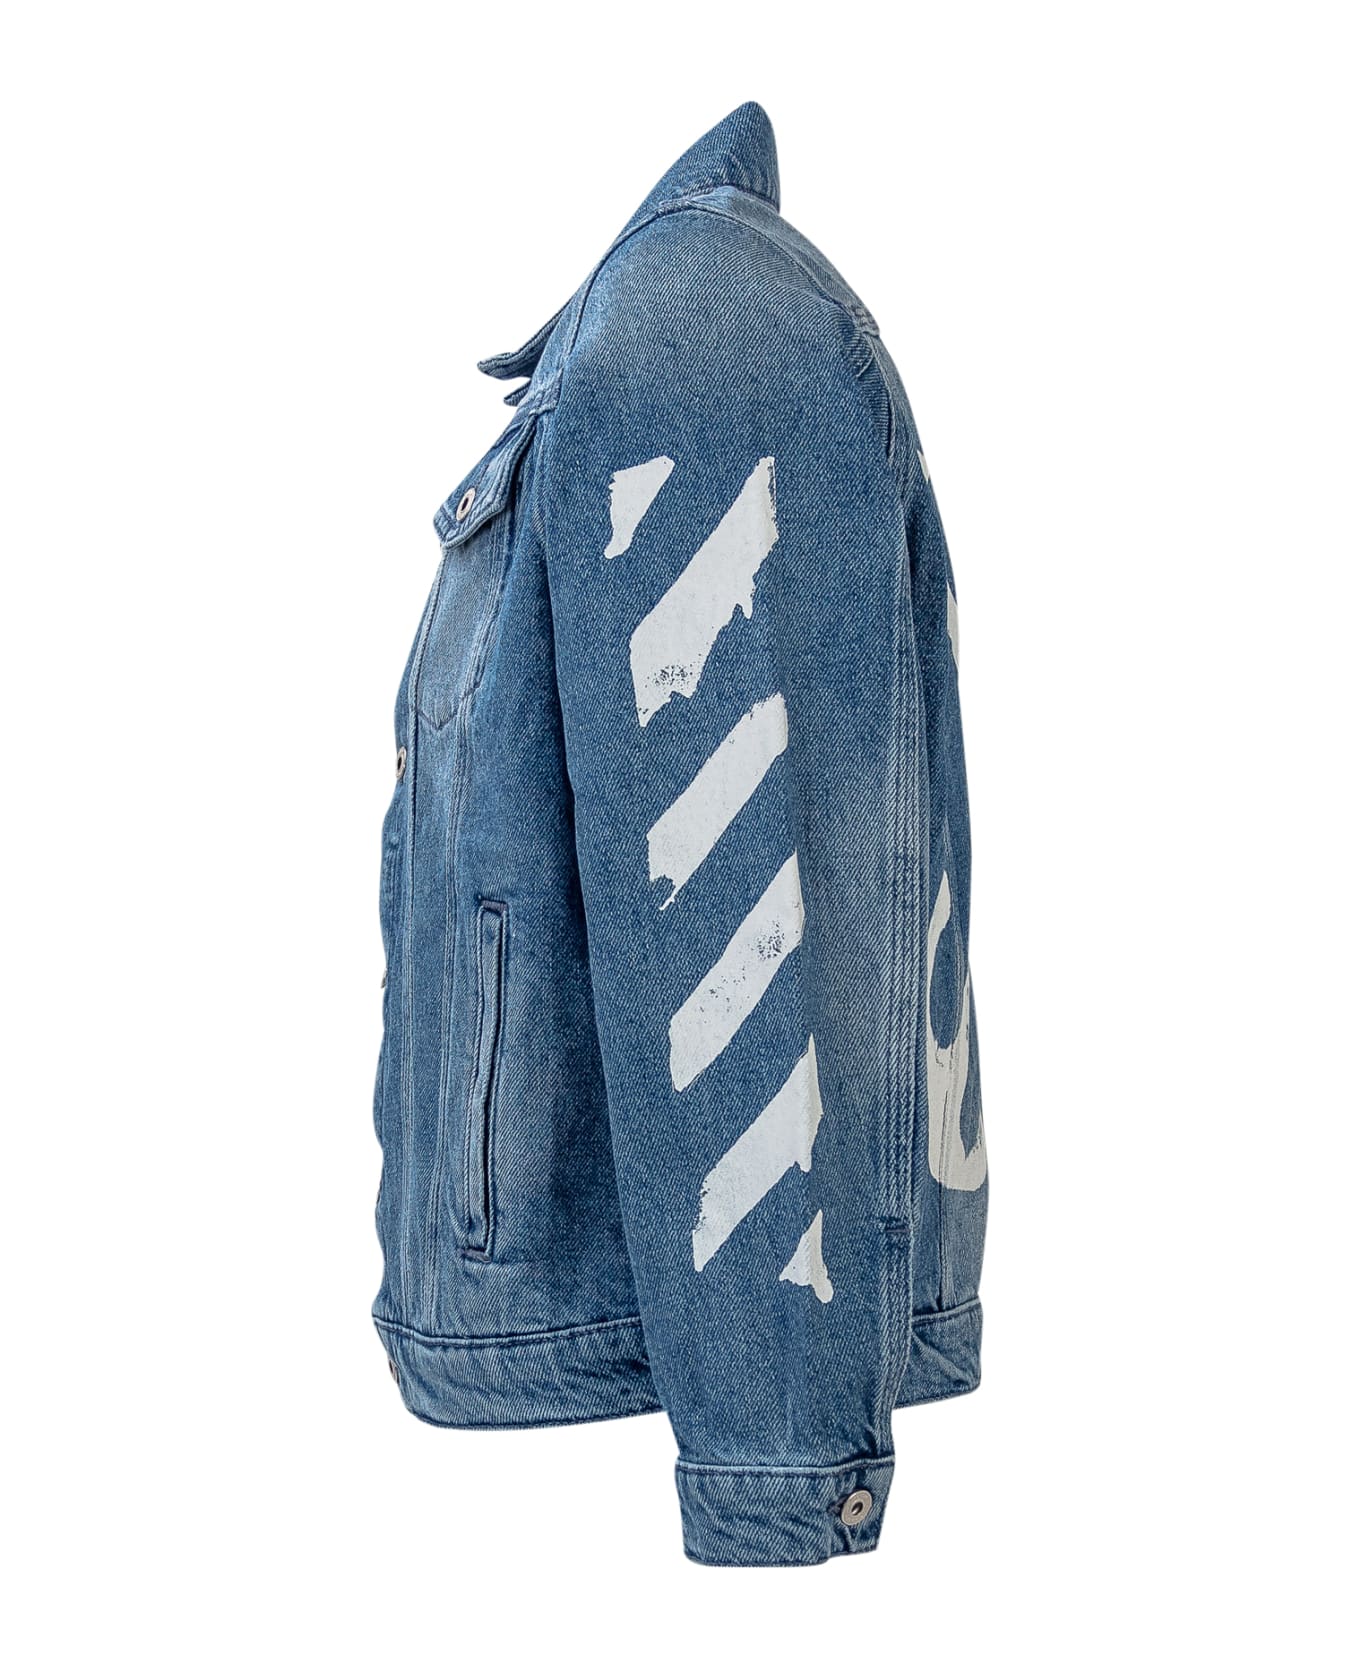 Off-White Paint Graphic Jacket - NAVY